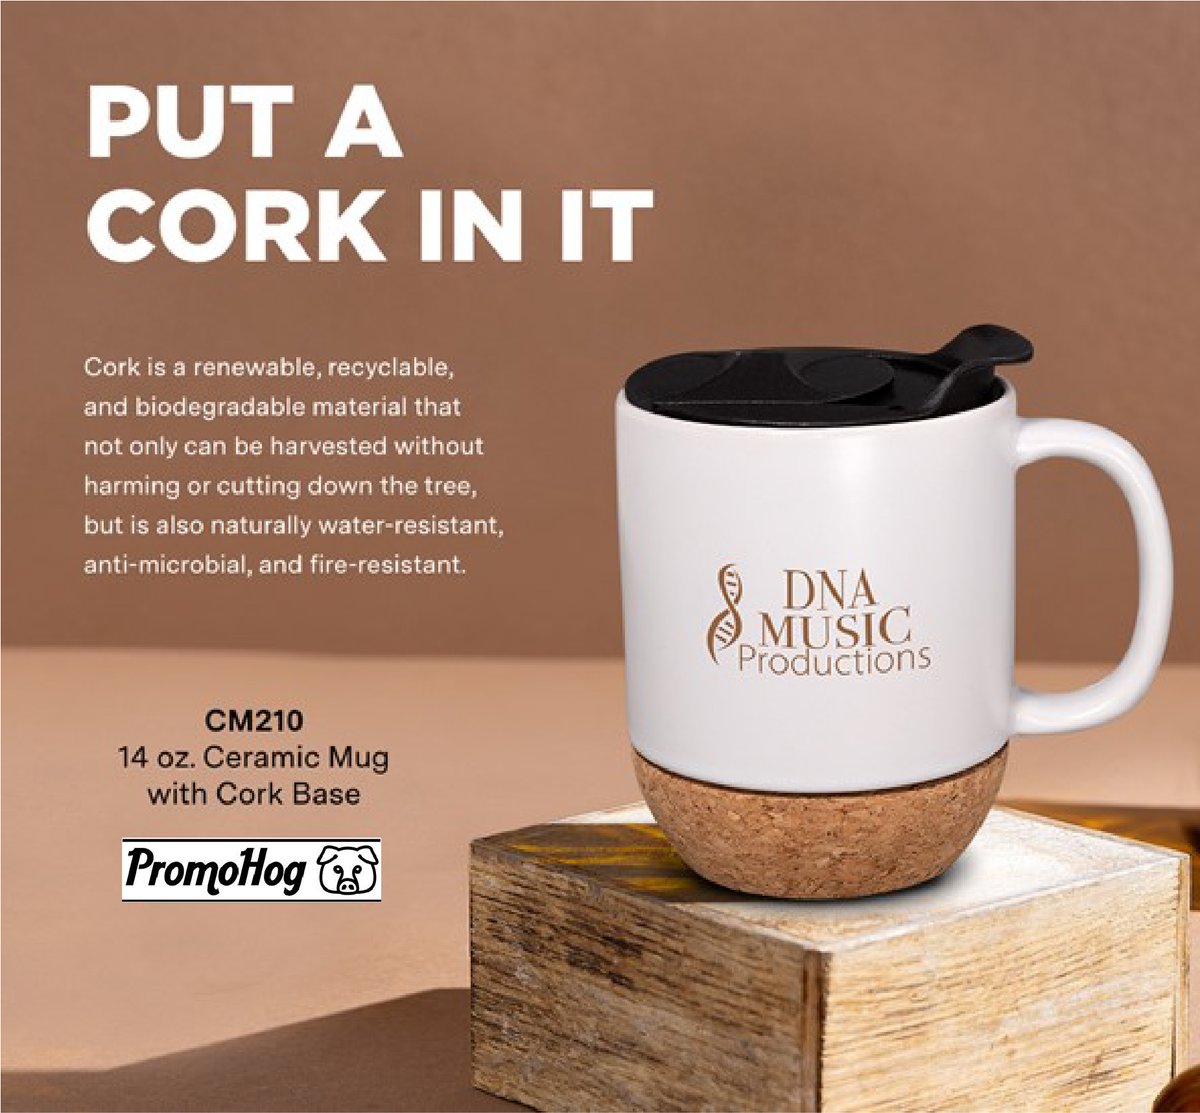 rb.gy/czgivh
Enjoy your favorite hot beverage without worrying about the effects of your glass on delicate serving surfaces with this handsome mug! 
#promohog #putyourlogoonit #swagitup #swagworks #promoworks #brandbuilding #BrandedMerch